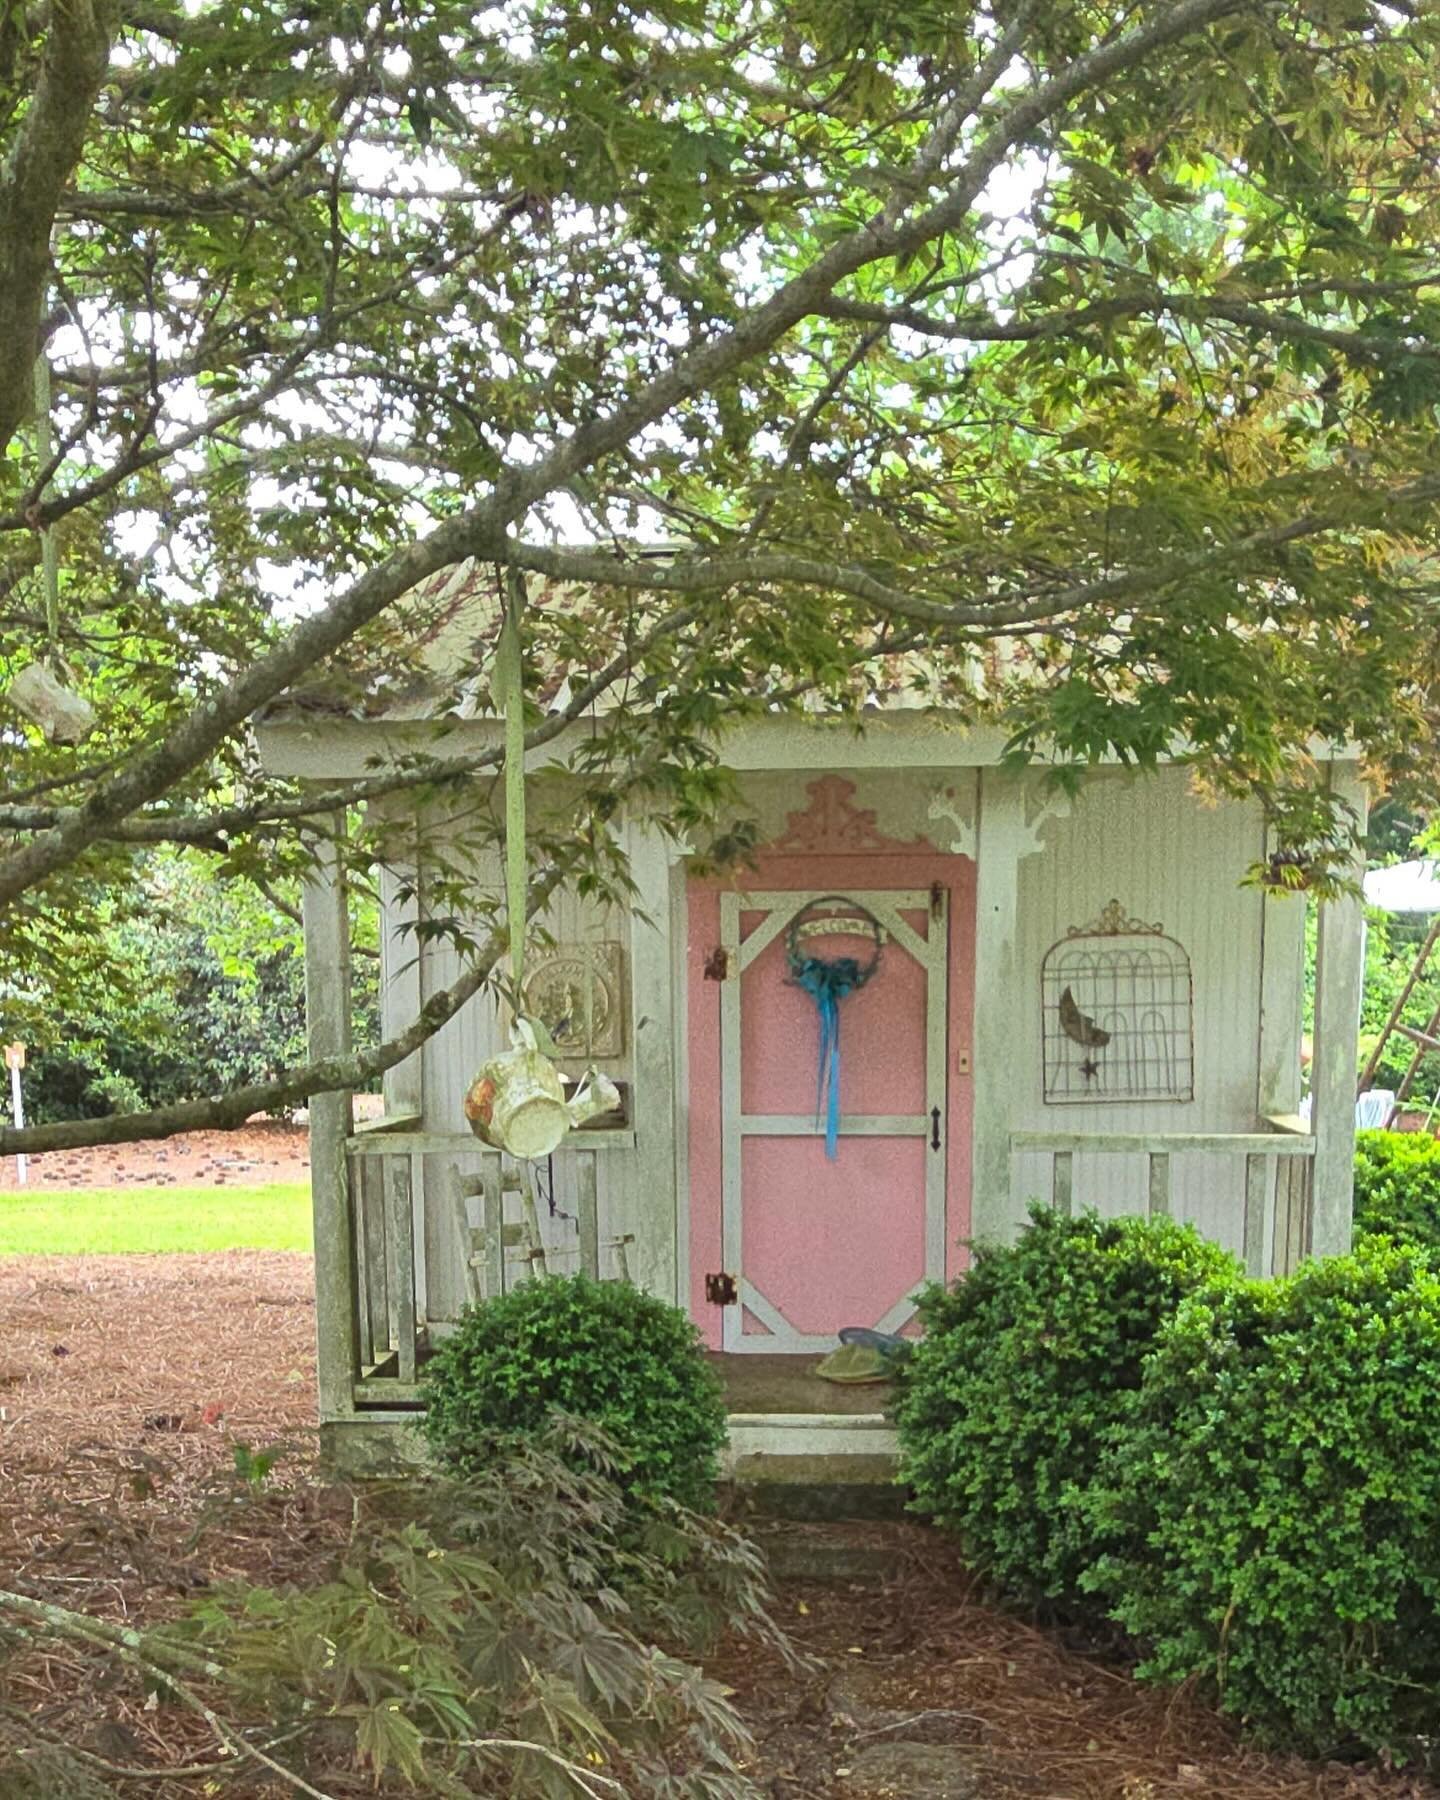 Happy May Day!🌷🍃🩷
⠀⠀⠀⠀⠀⠀⠀⠀⠀
Discovered this precious pink play house at the Flower Fantasy event a couple of weeks ago. I never had a play house as a child, but sure would love one now &amp; use it as my tiny art studio! Loved the little rose tea 